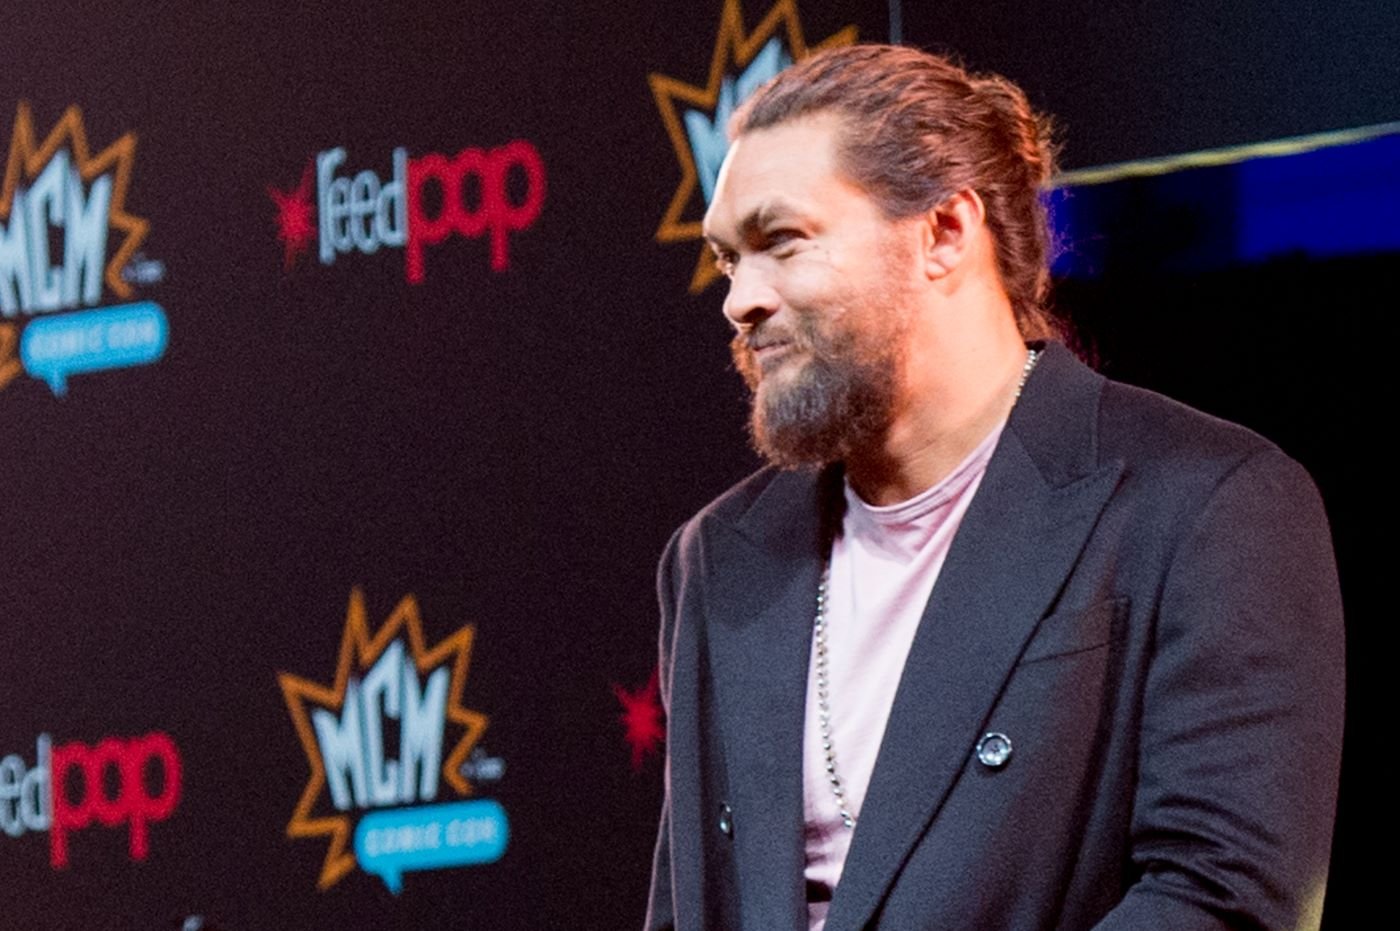 Jason Momoa dressed in a black suit with a lavender shirt with a black background with red, blue, orange, and white writing.